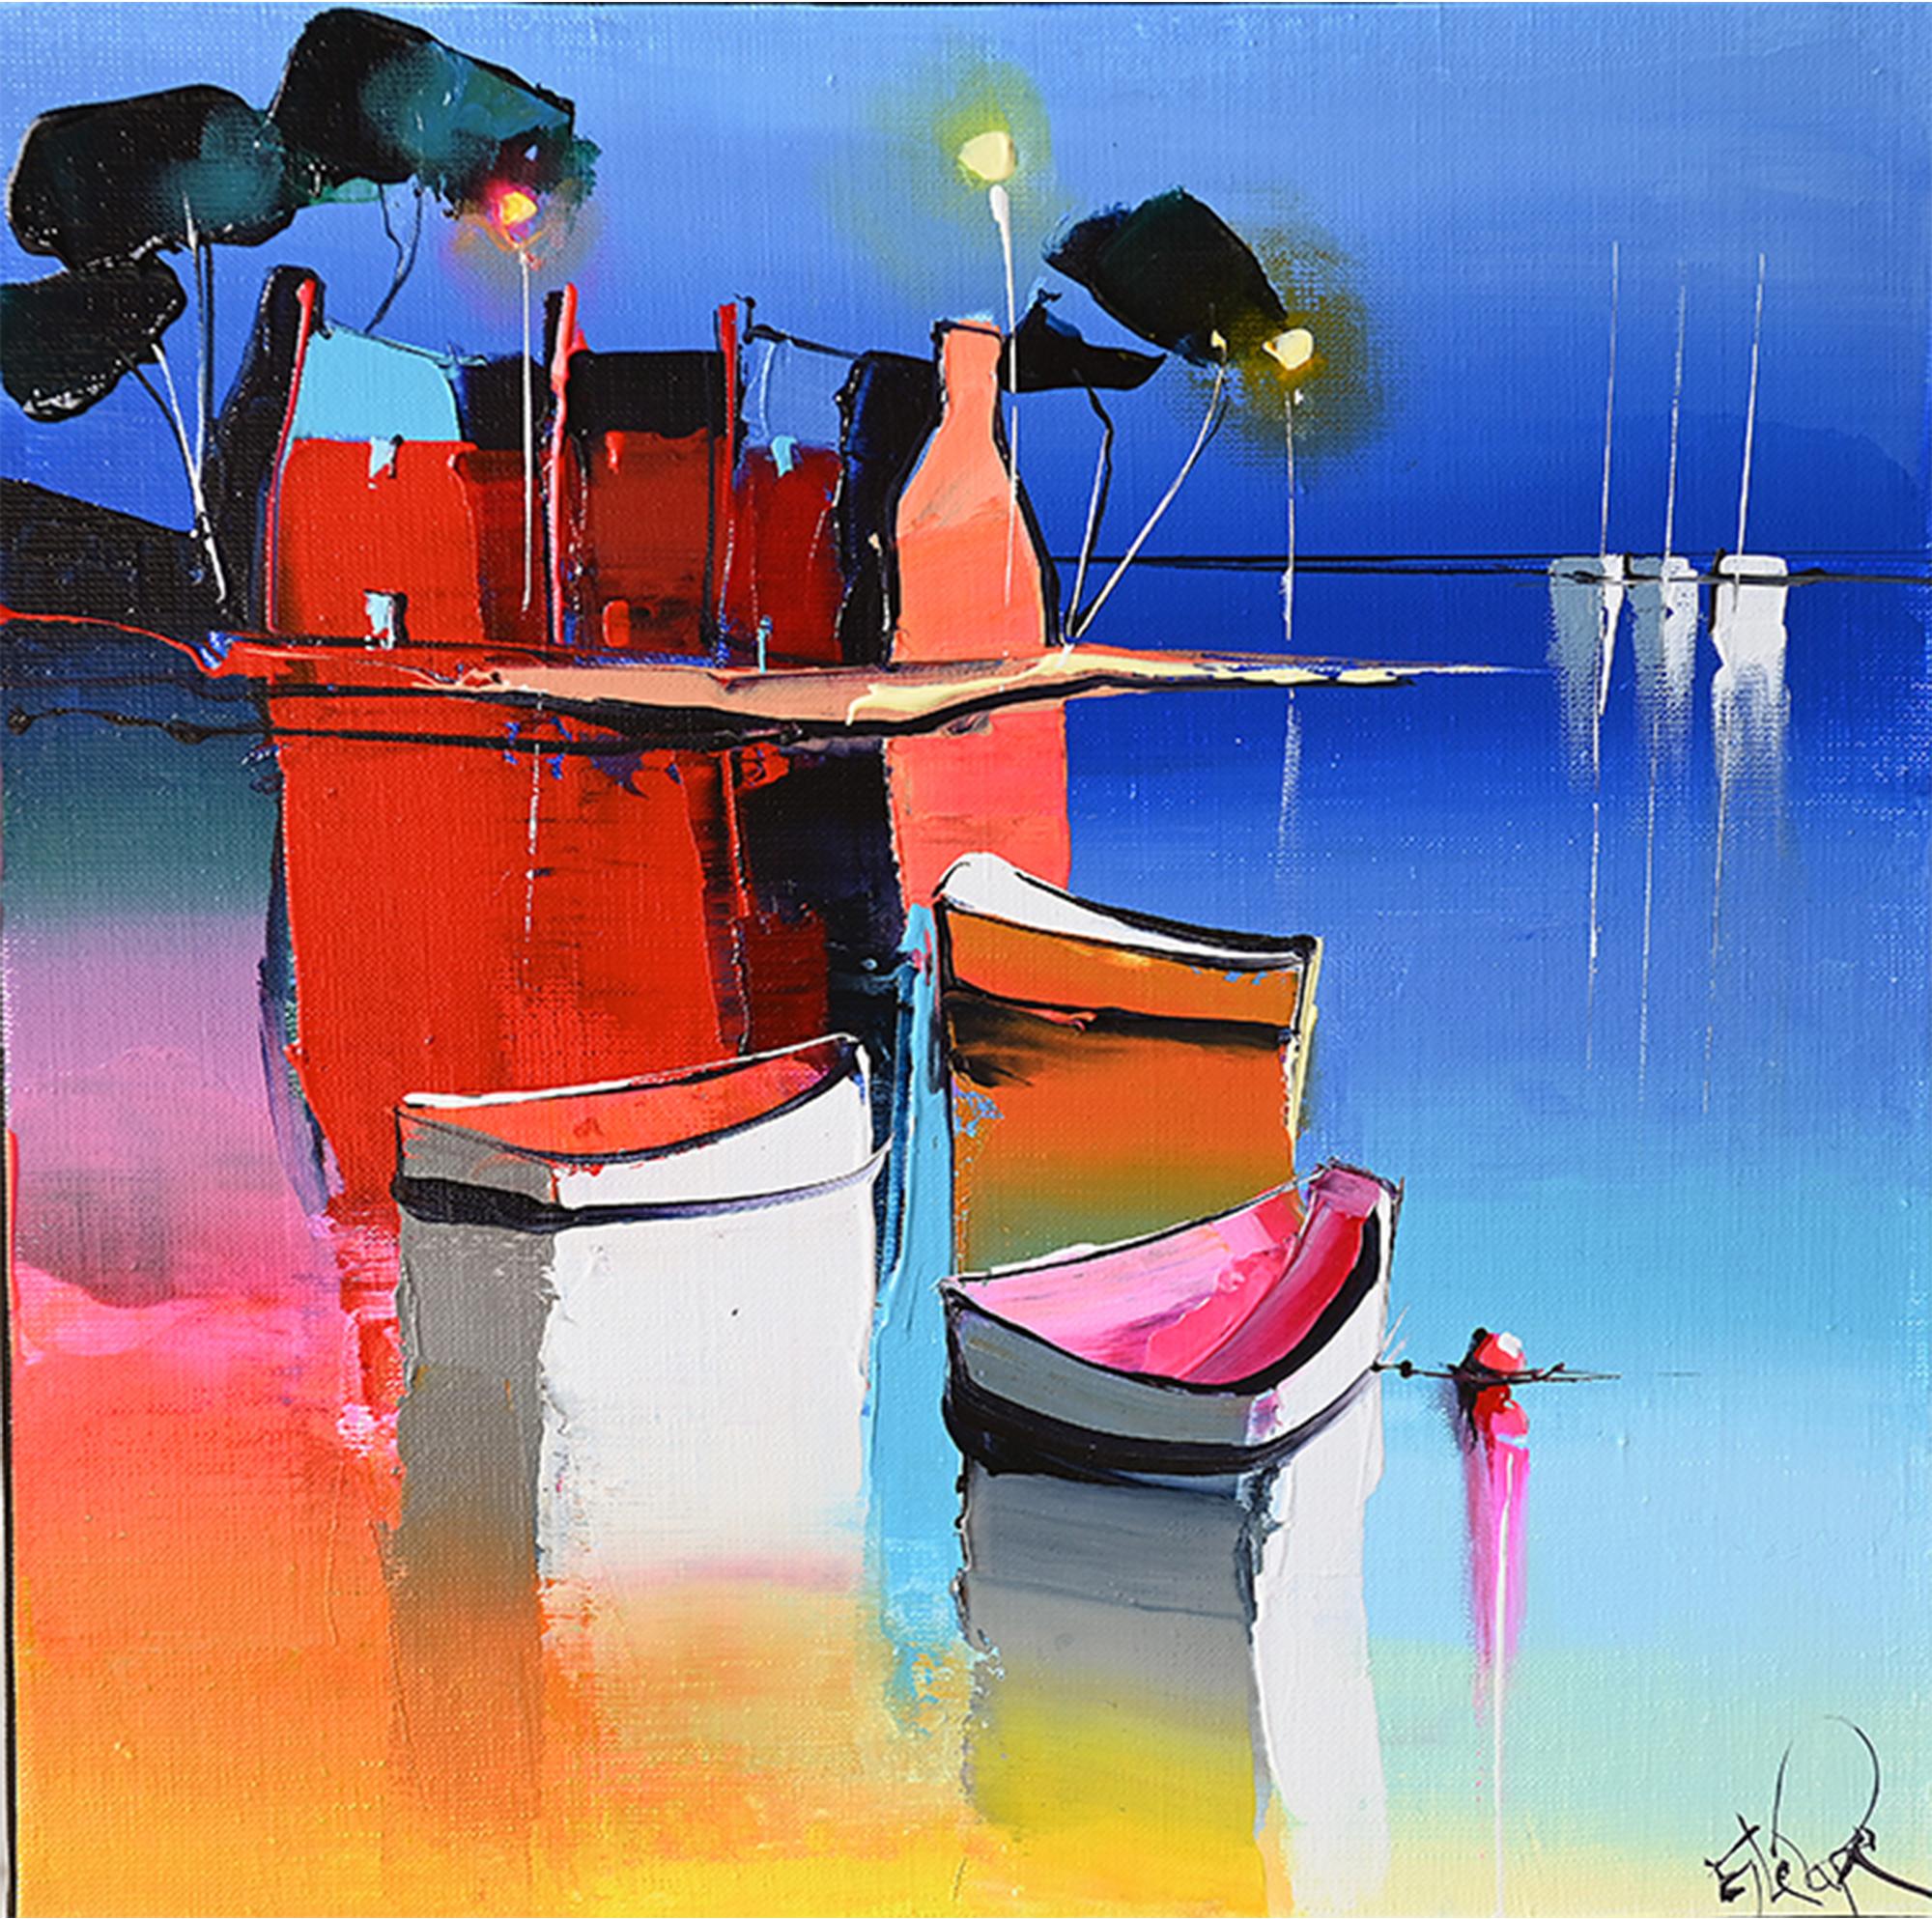 ﻿﻿Framing is included - please note that the frame will add a few inches all around.

Eric Le Pape
After a maritime career punctuated by numerous travels and adventures on the open sea, I decided to return to my first passion: painting. I soaked in